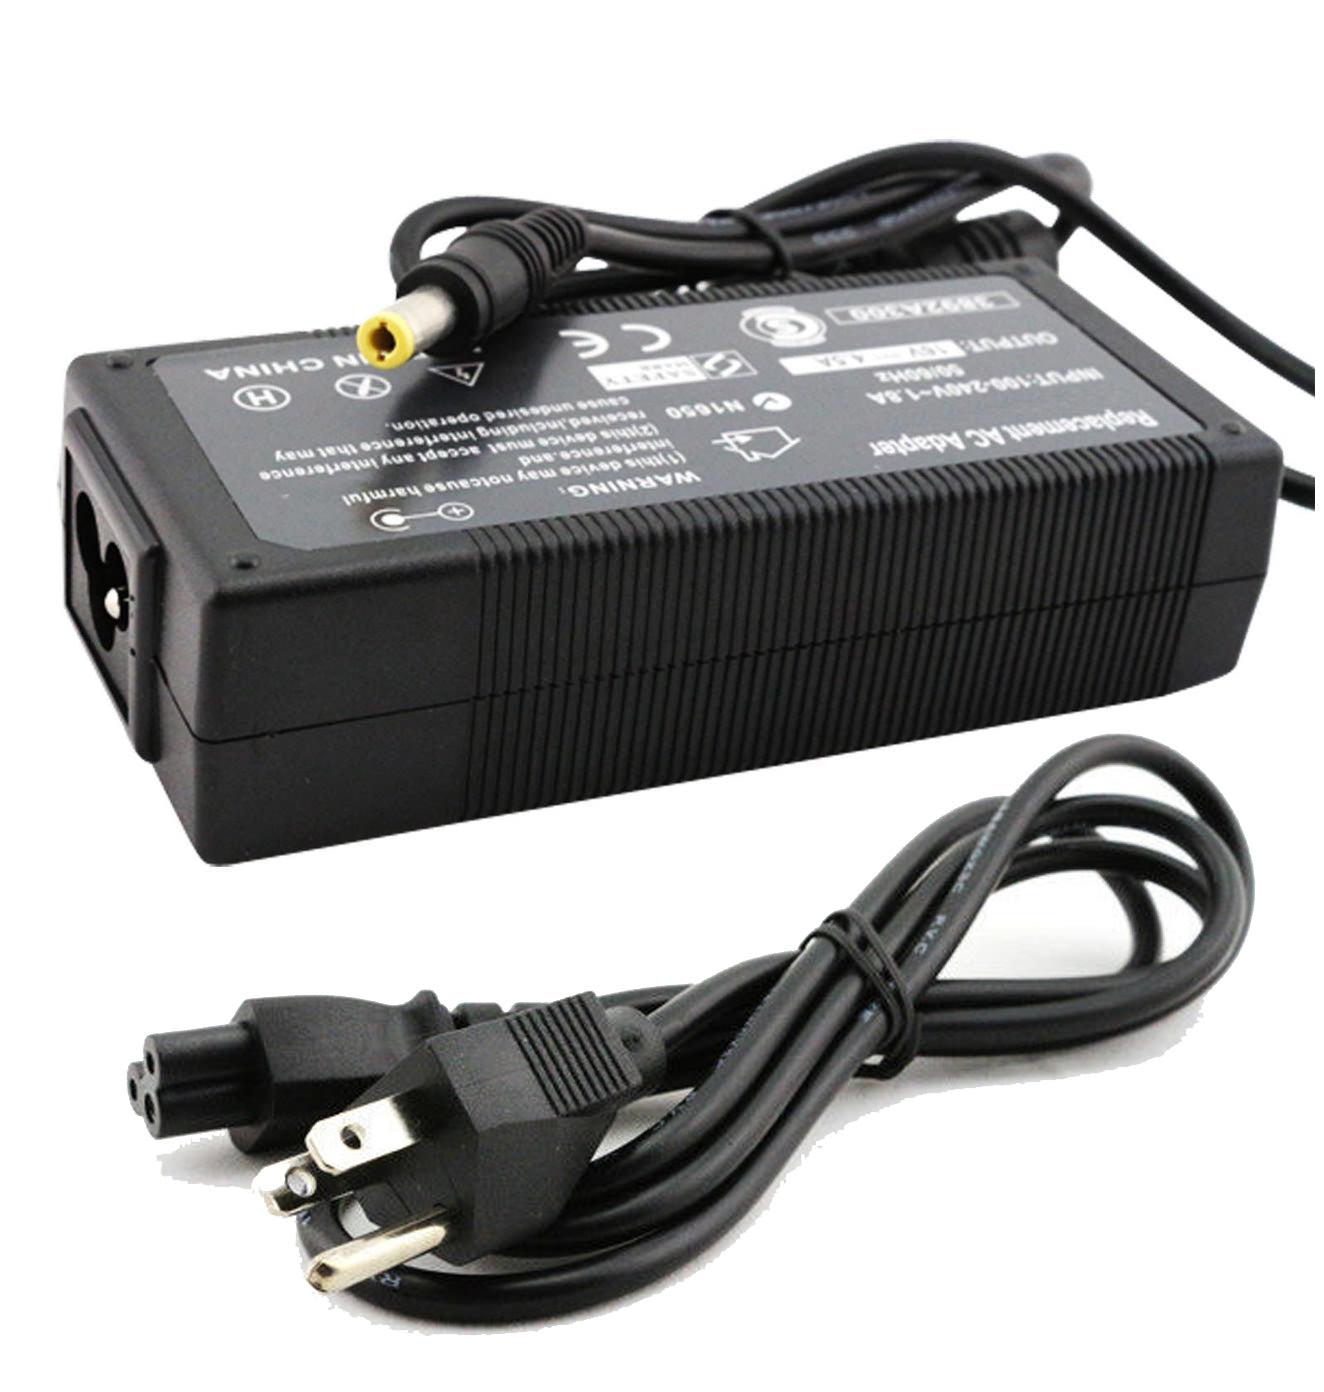 AC Adapter Charger for Panasonic Toughbook CF-Y2 Notebook.